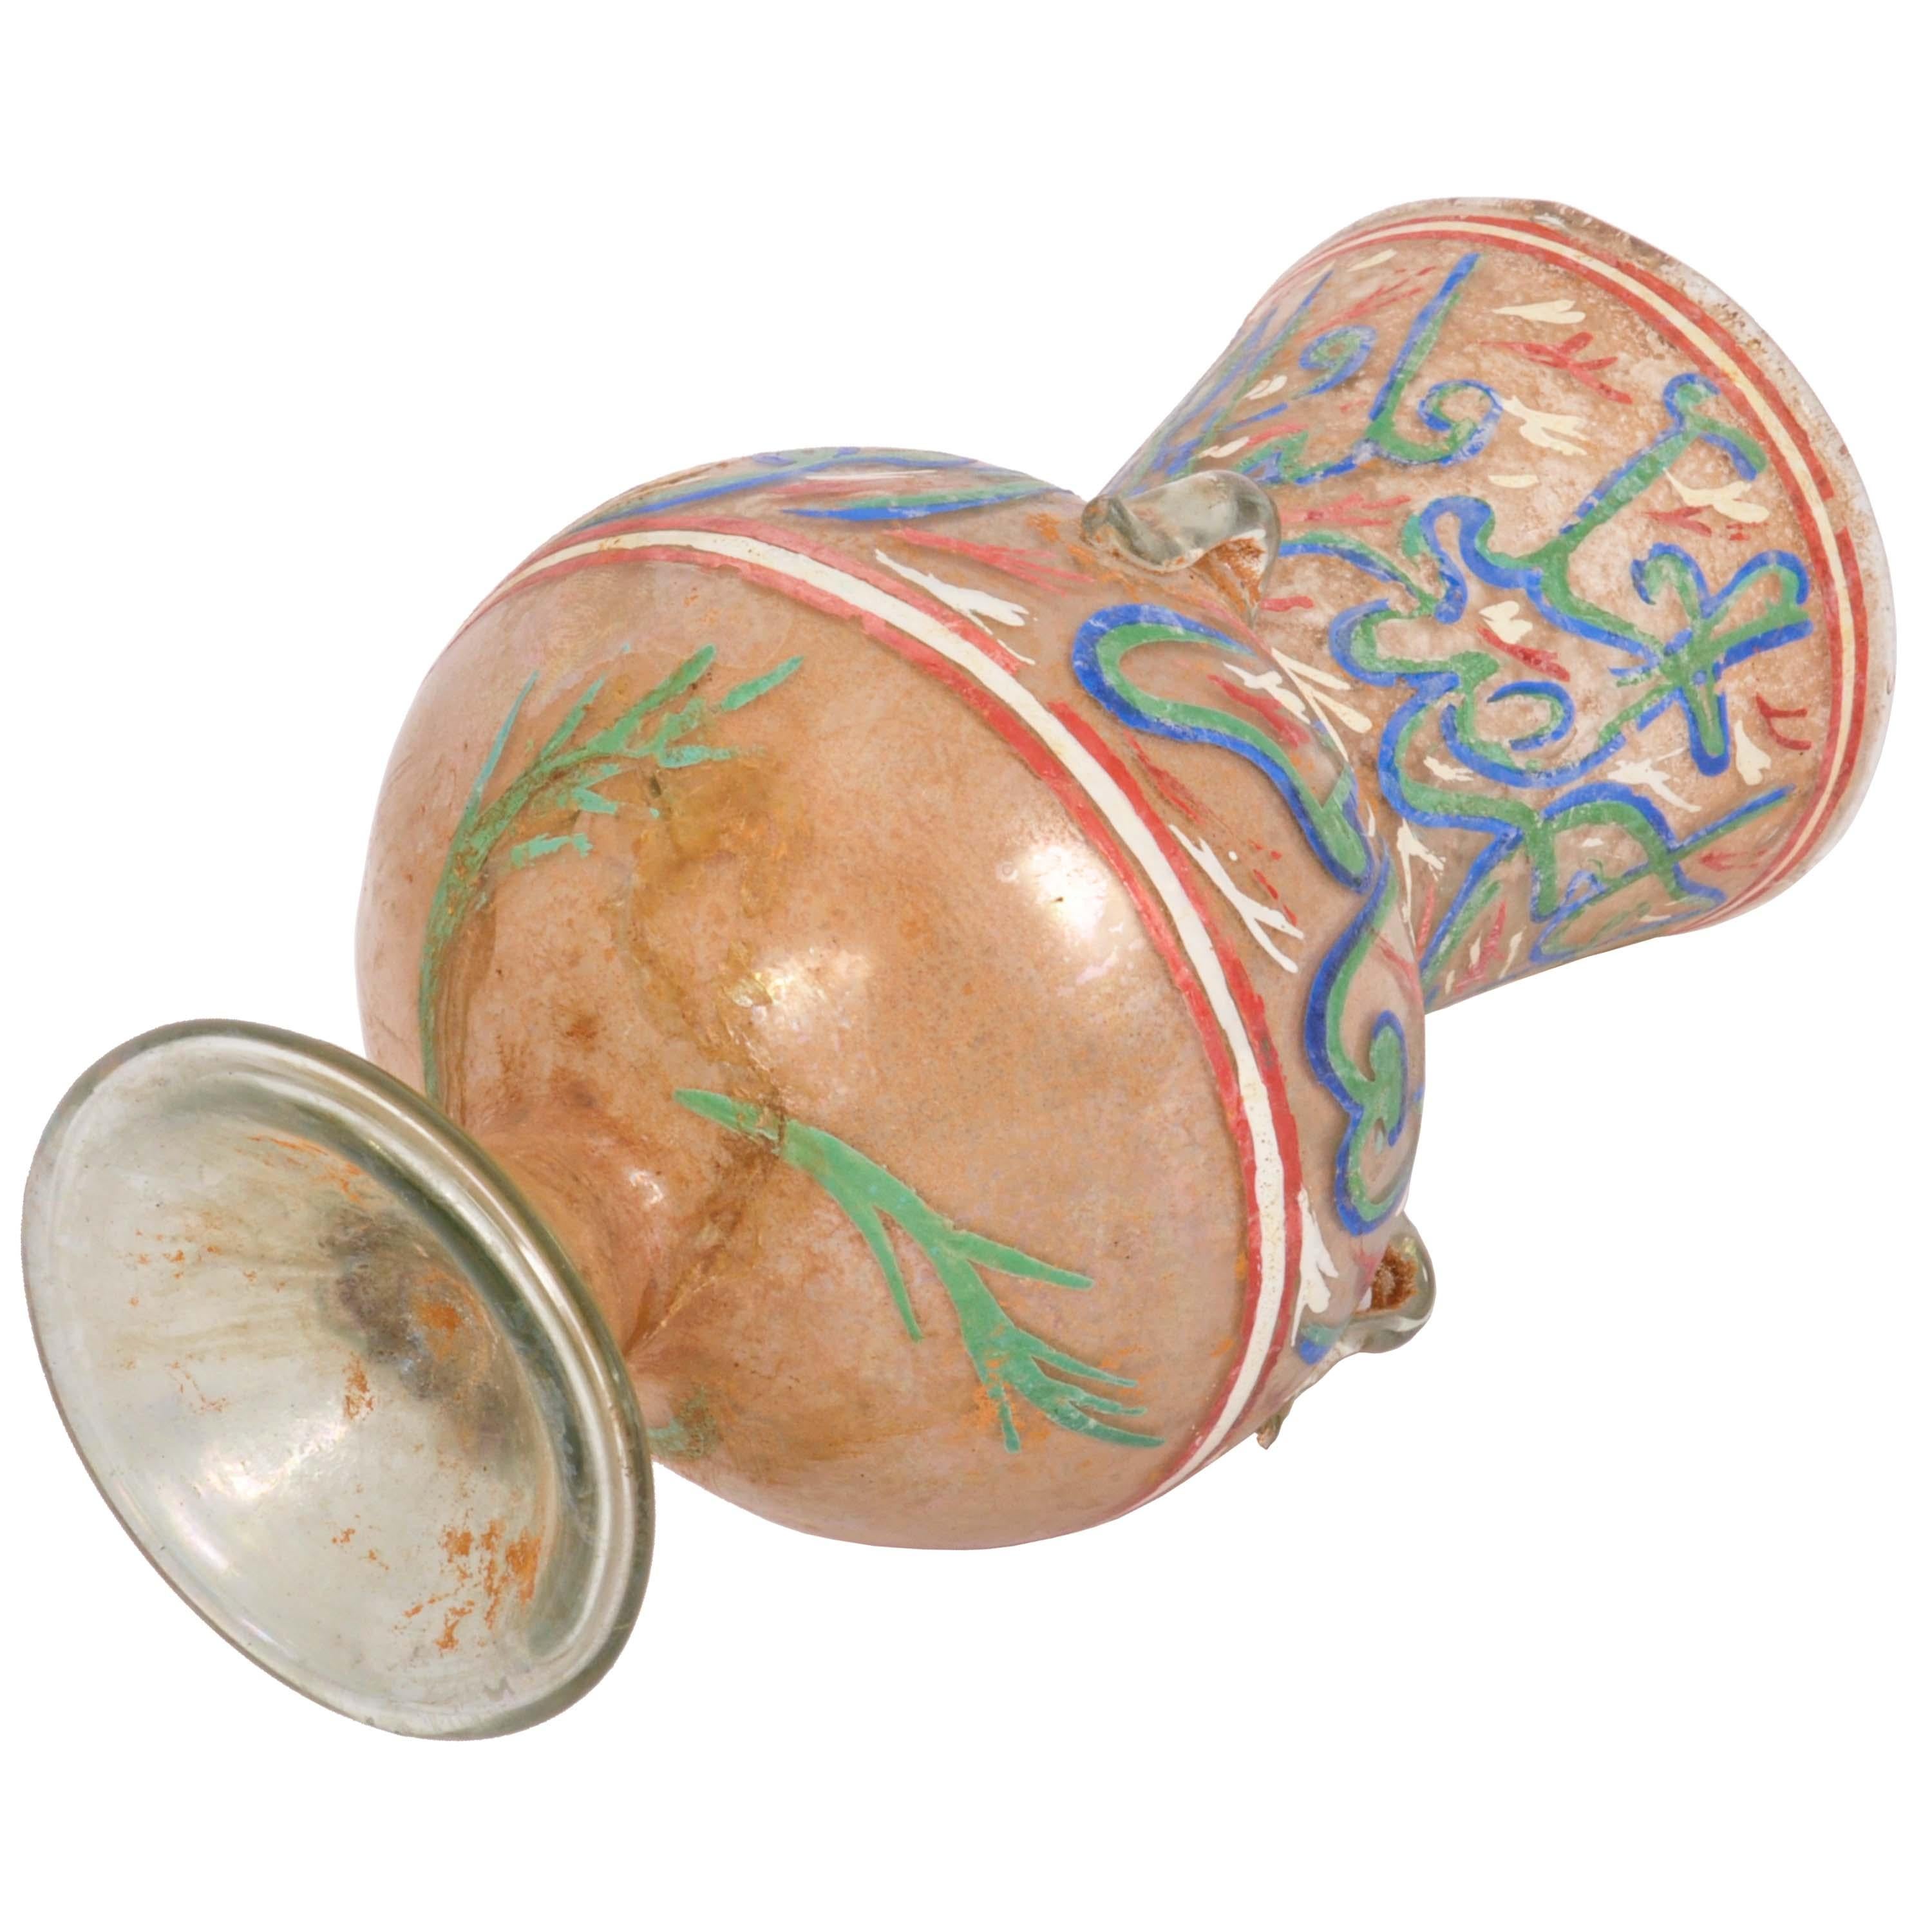 Ancient Antique 16th Century Islamic Calligraphy Mamluk Glass Mosque Lamp 1500  In Good Condition For Sale In Portland, OR